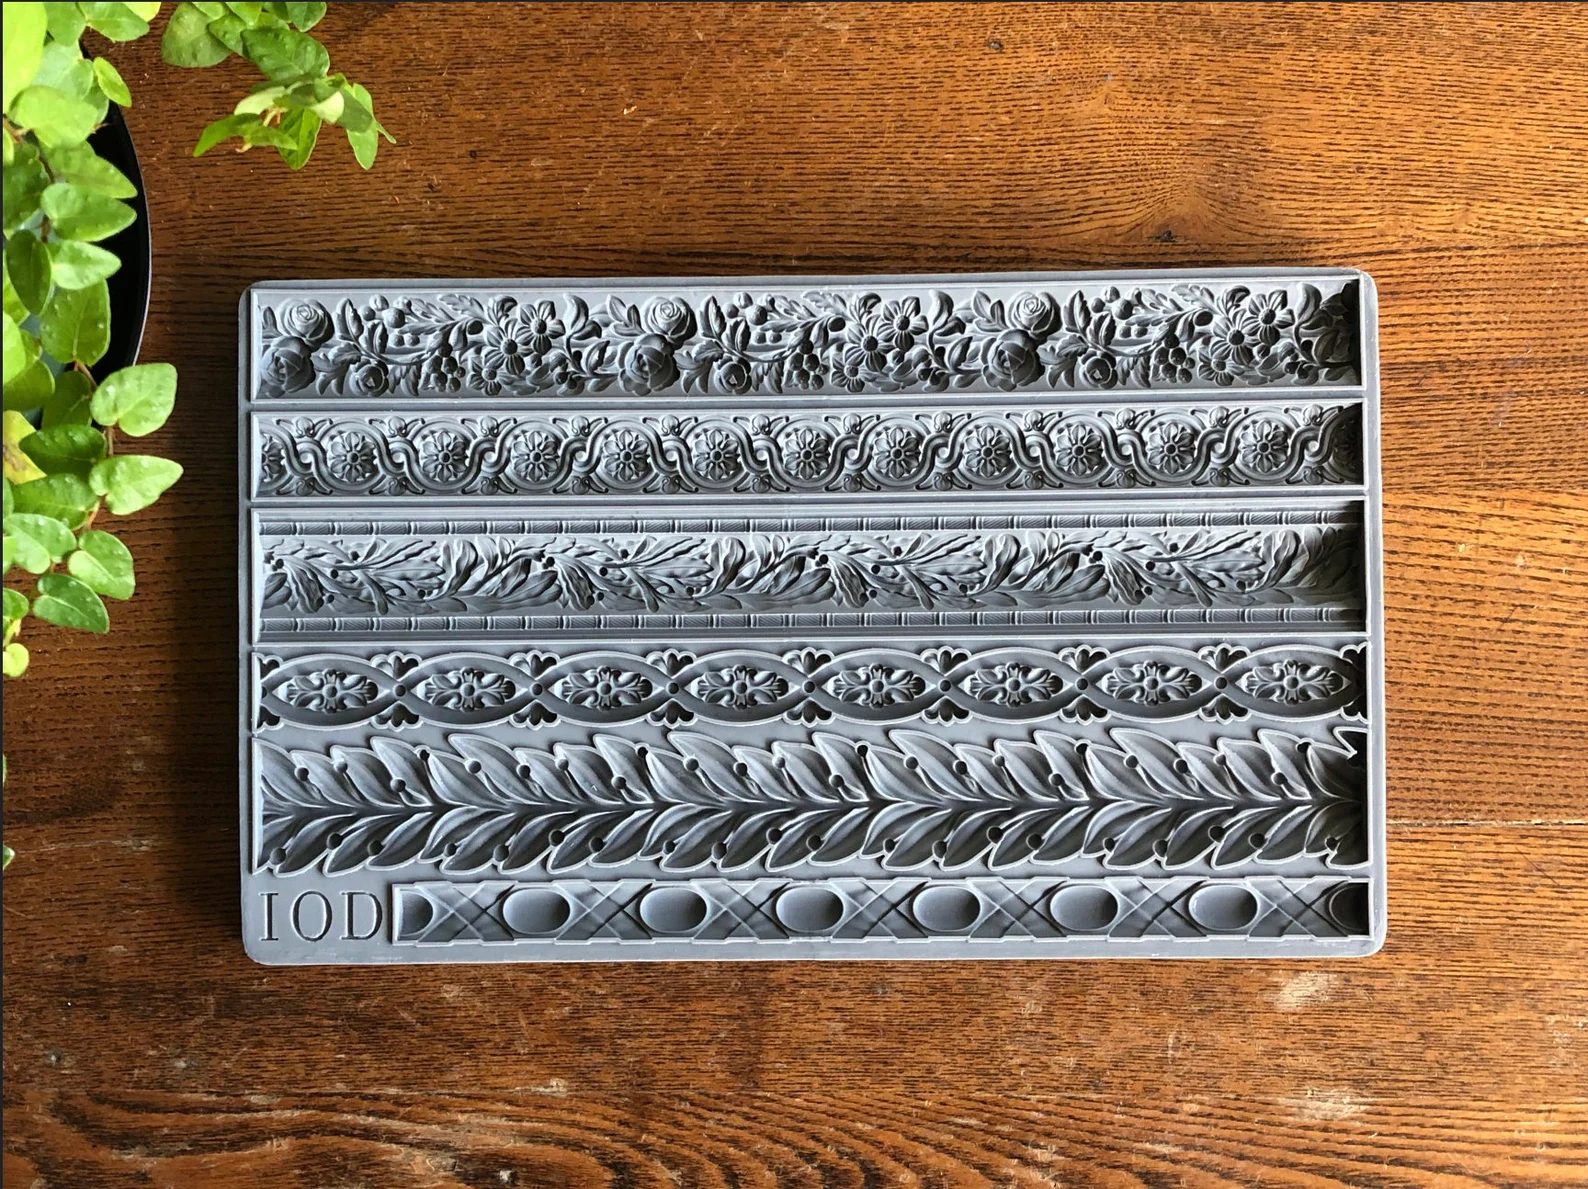 TRIMMINGS 1 6×10 IOD MOULD - Upcycled Home & Garden